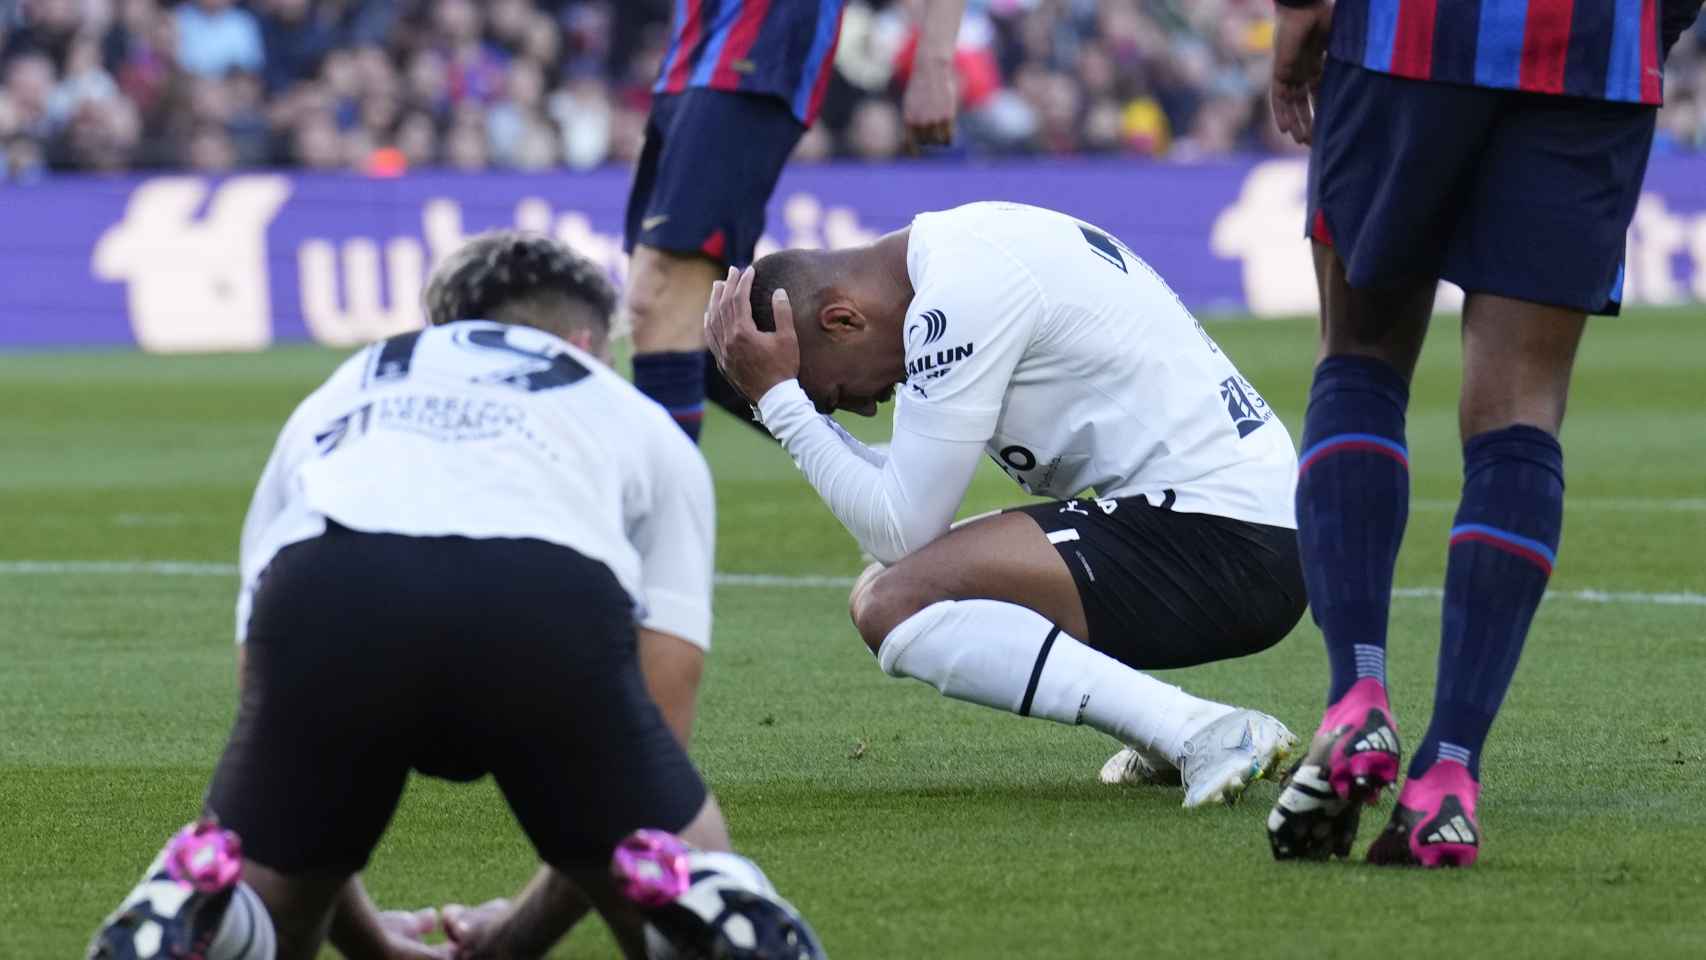 The Valencia players lament.